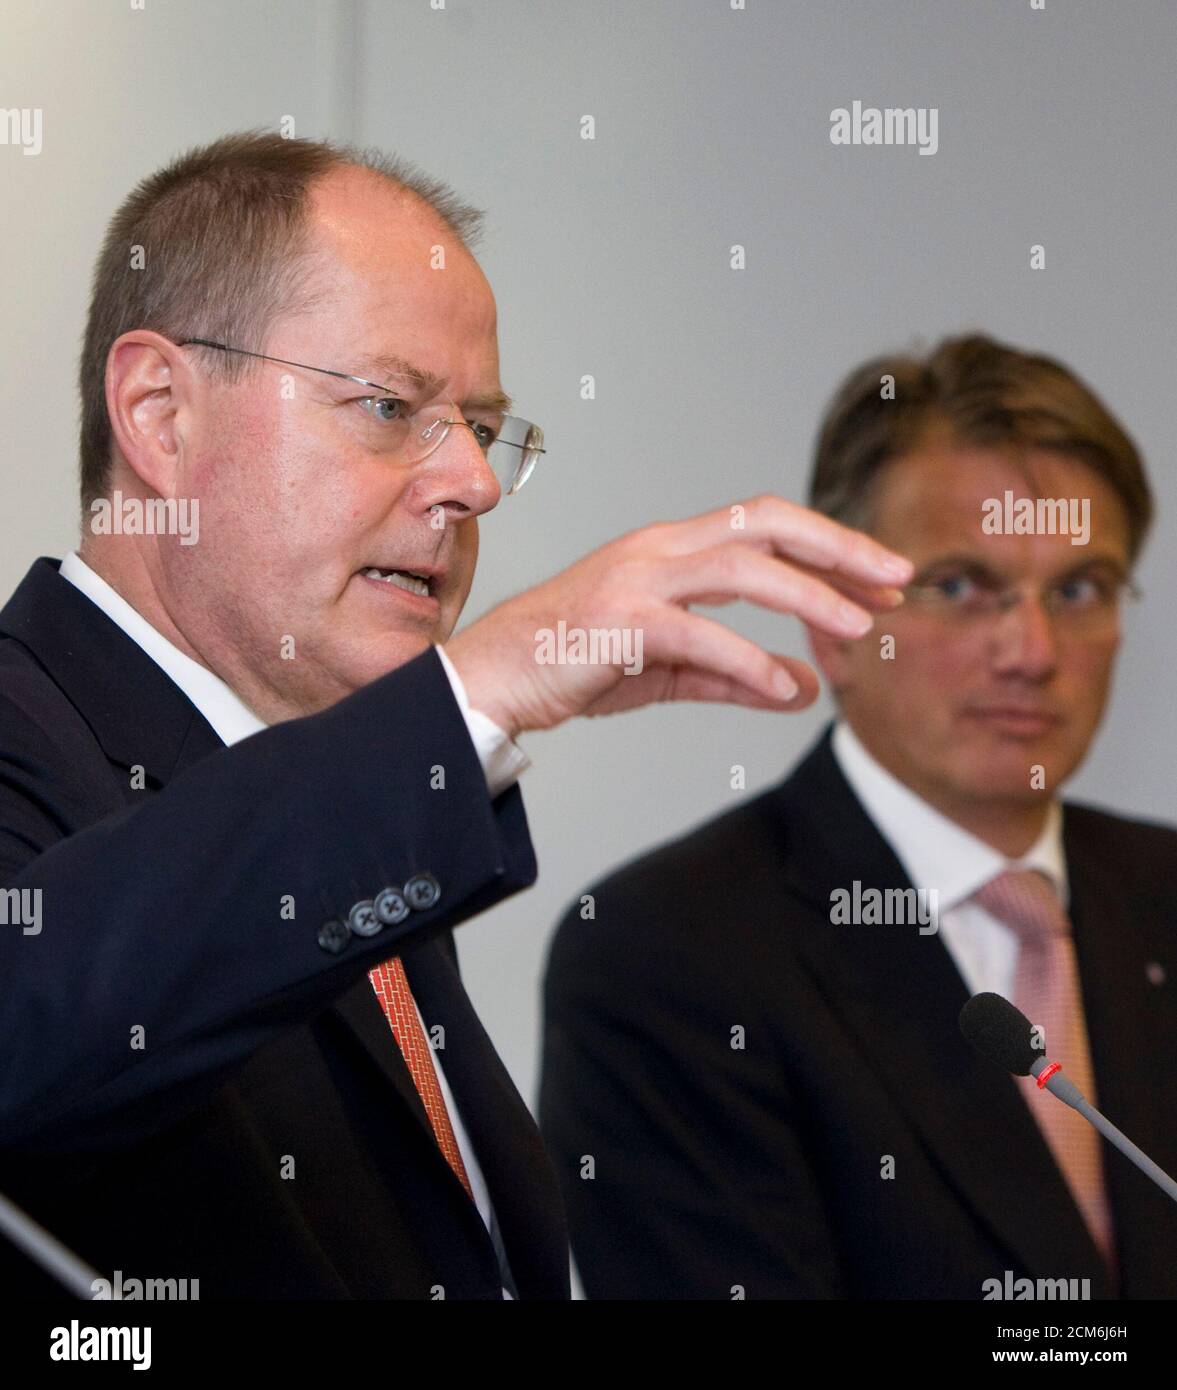 German Finance Minister Peer Steinbrueck (L) speaks during a news conference on the situation of credit financing in the German economy as the President of the cooperative banks alliance of Volksbanken and Raiffeisenbanken (BVR) Uwe Froehlich listens in Berlin September 1, 2009.  REUTERS/Thomas Peter  (GERMANY POLITICS BUSINESS) Stock Photo